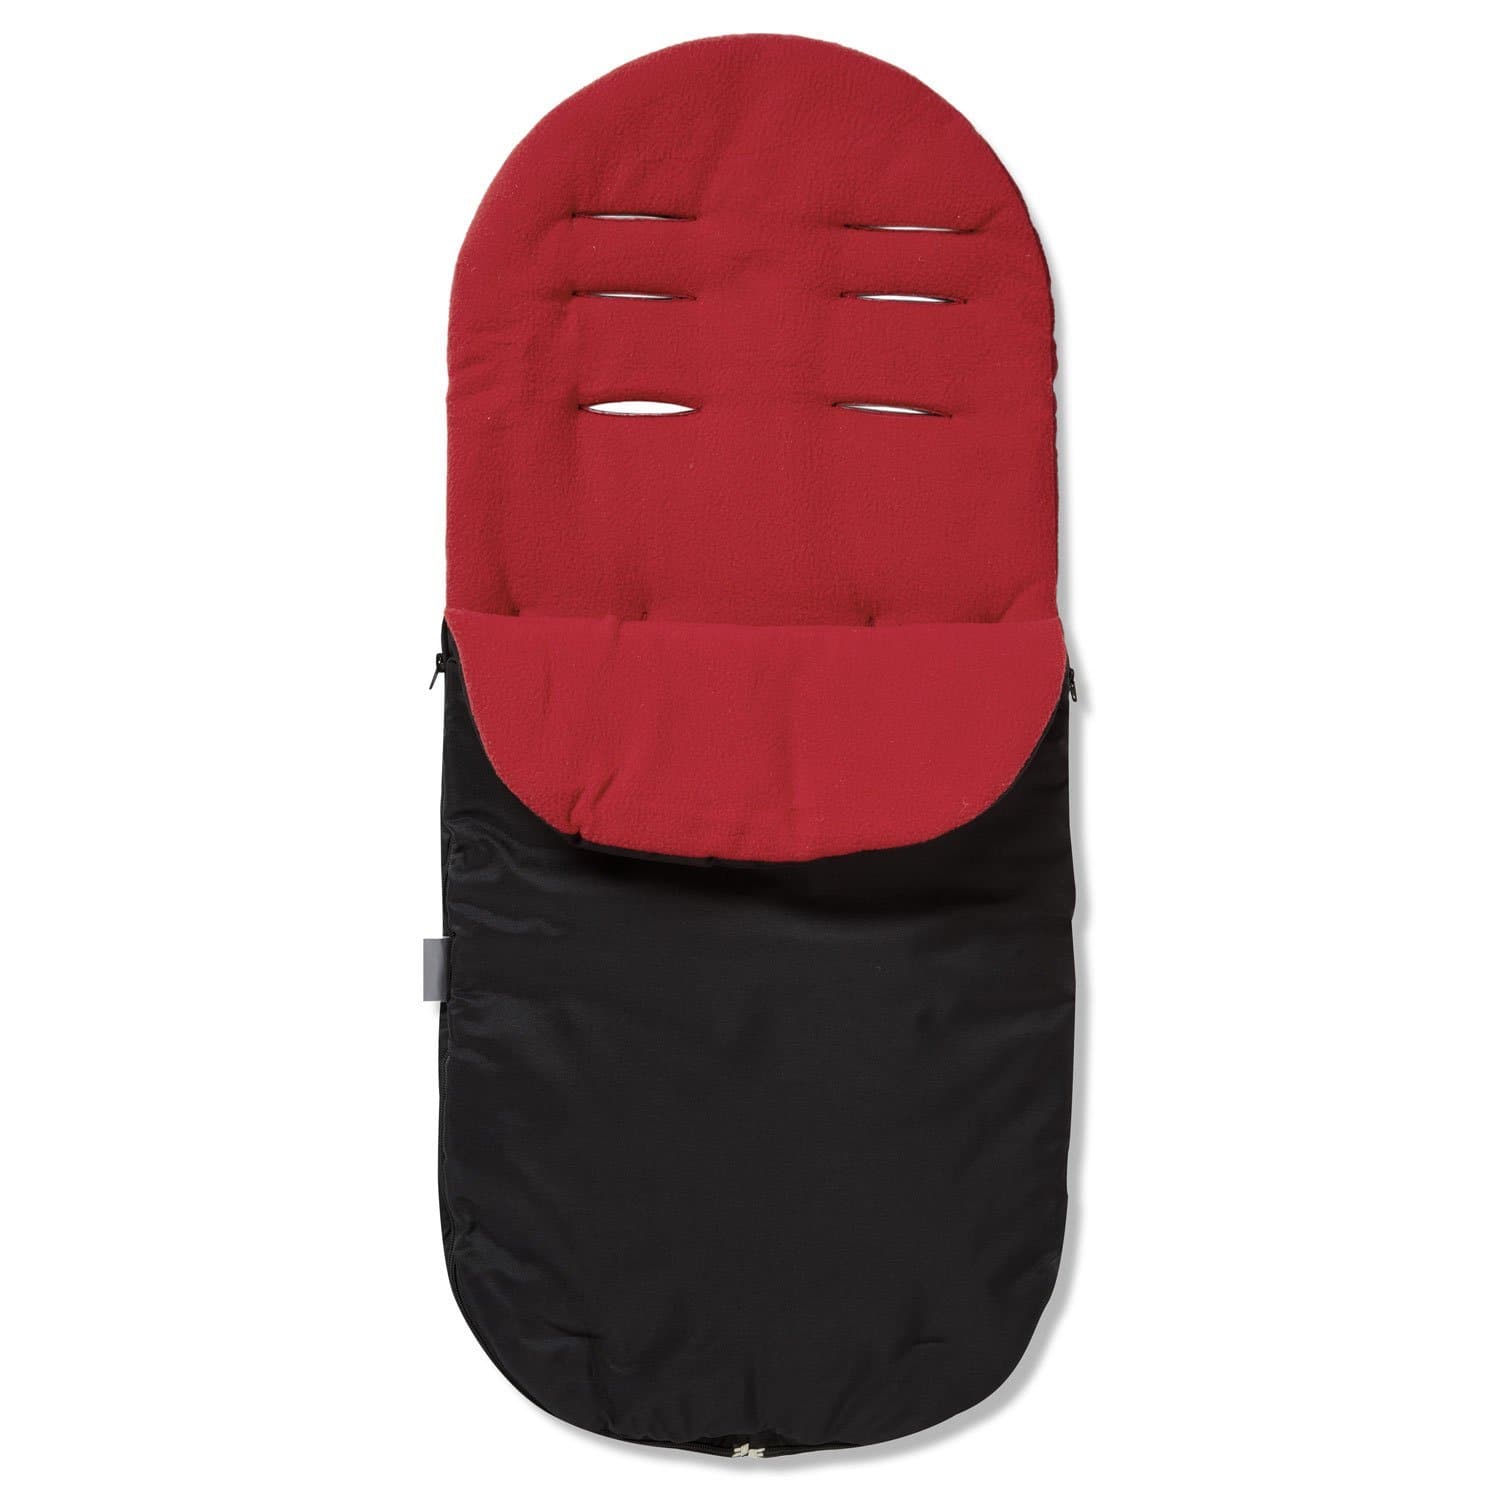 Footmuff / Cosy Toes Compatible with Orbit - Red / Fits All Models | For Your Little One